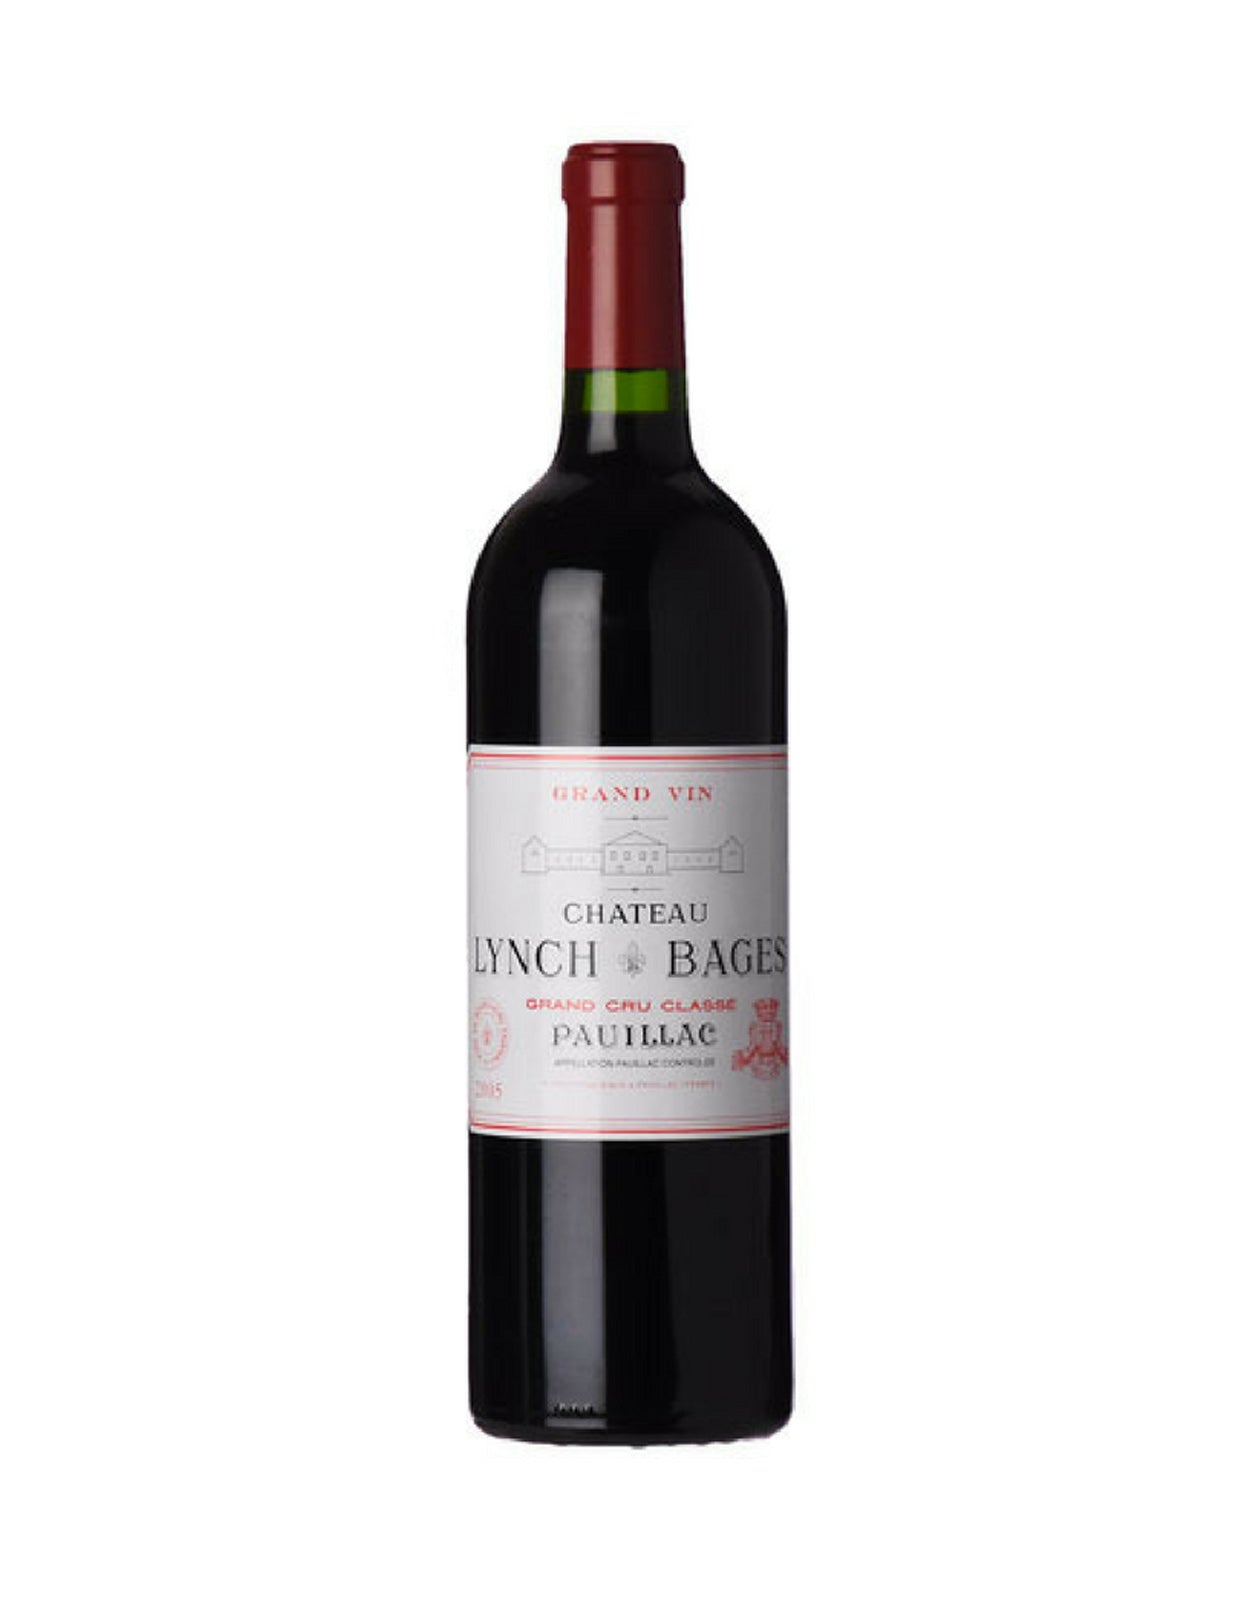 Chateau Lynch Bages 2012